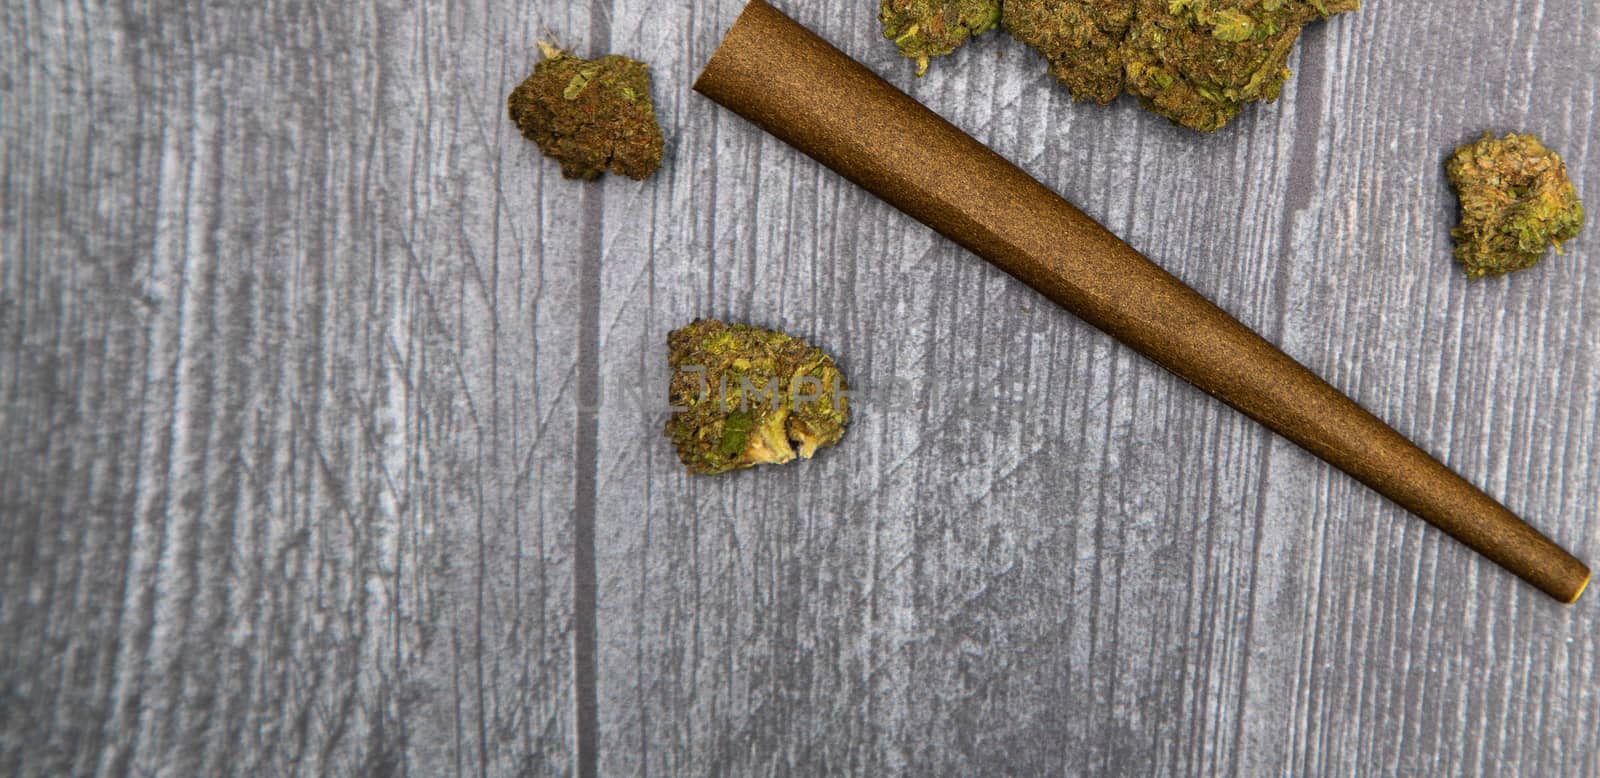 Several buds of medicinal marijuana sit on a wooden surface next to a CBD infused hemp wrap.